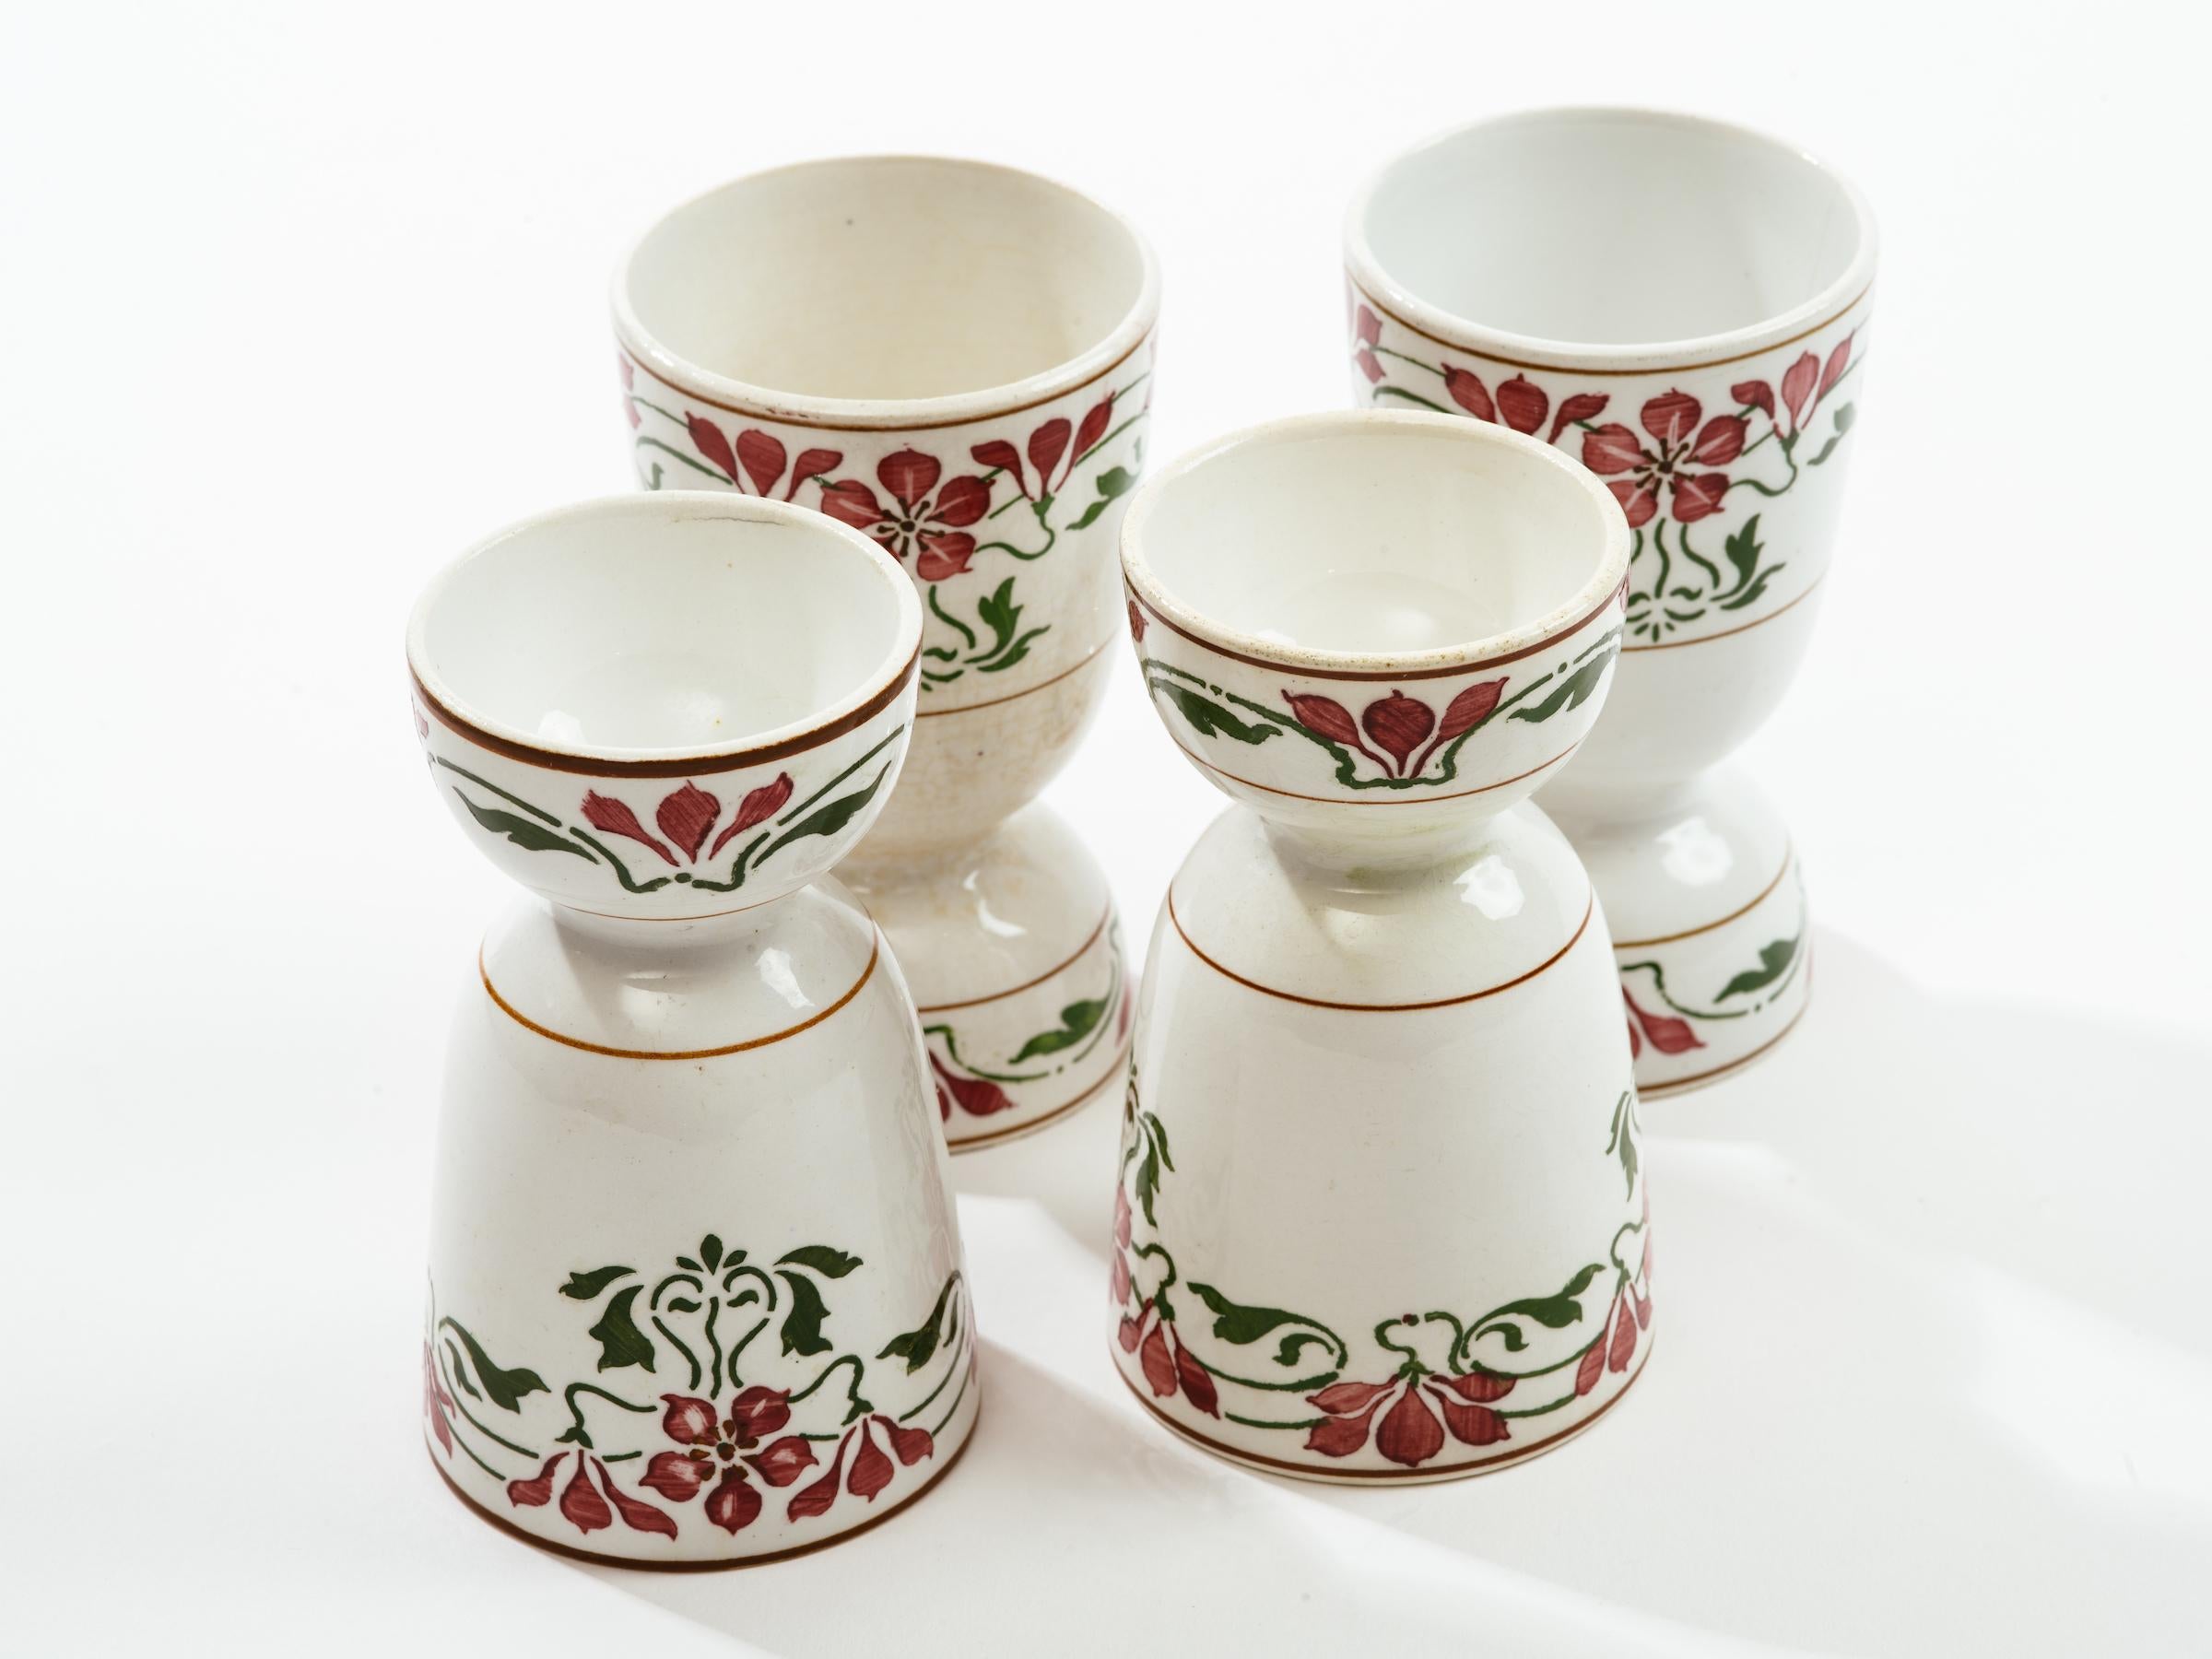 Art Nouveau Villeroy and Boch Saxony Poppy Porcelain Egg Cups In Good Condition For Sale In New York, NY